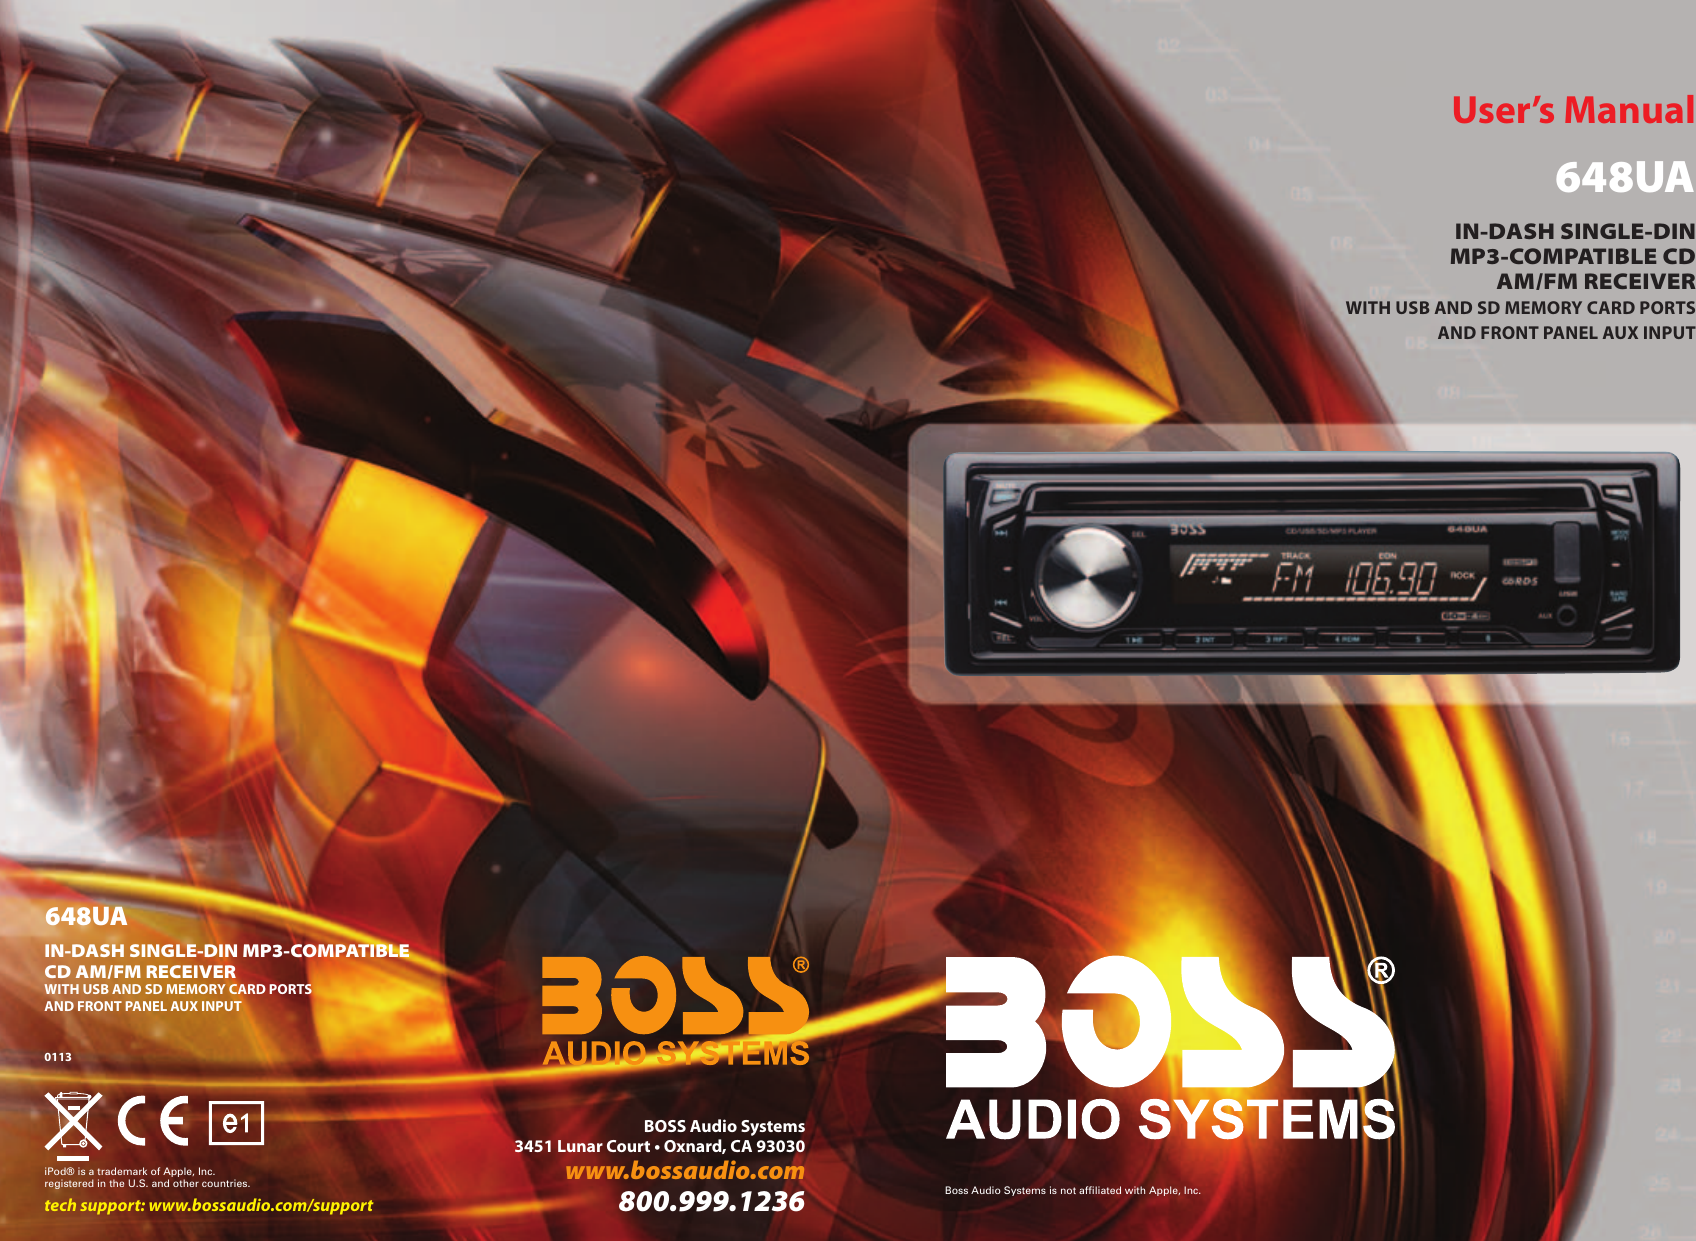 Page 1 of 5 - Boss-Audio-Systems Boss-Audio-Systems-Stereo-System-648Ua-Users-Manual- Boss 648BI Car Radio OWNER'S MANUAL Operating Instructions User  Boss-audio-systems-stereo-system-648ua-users-manual